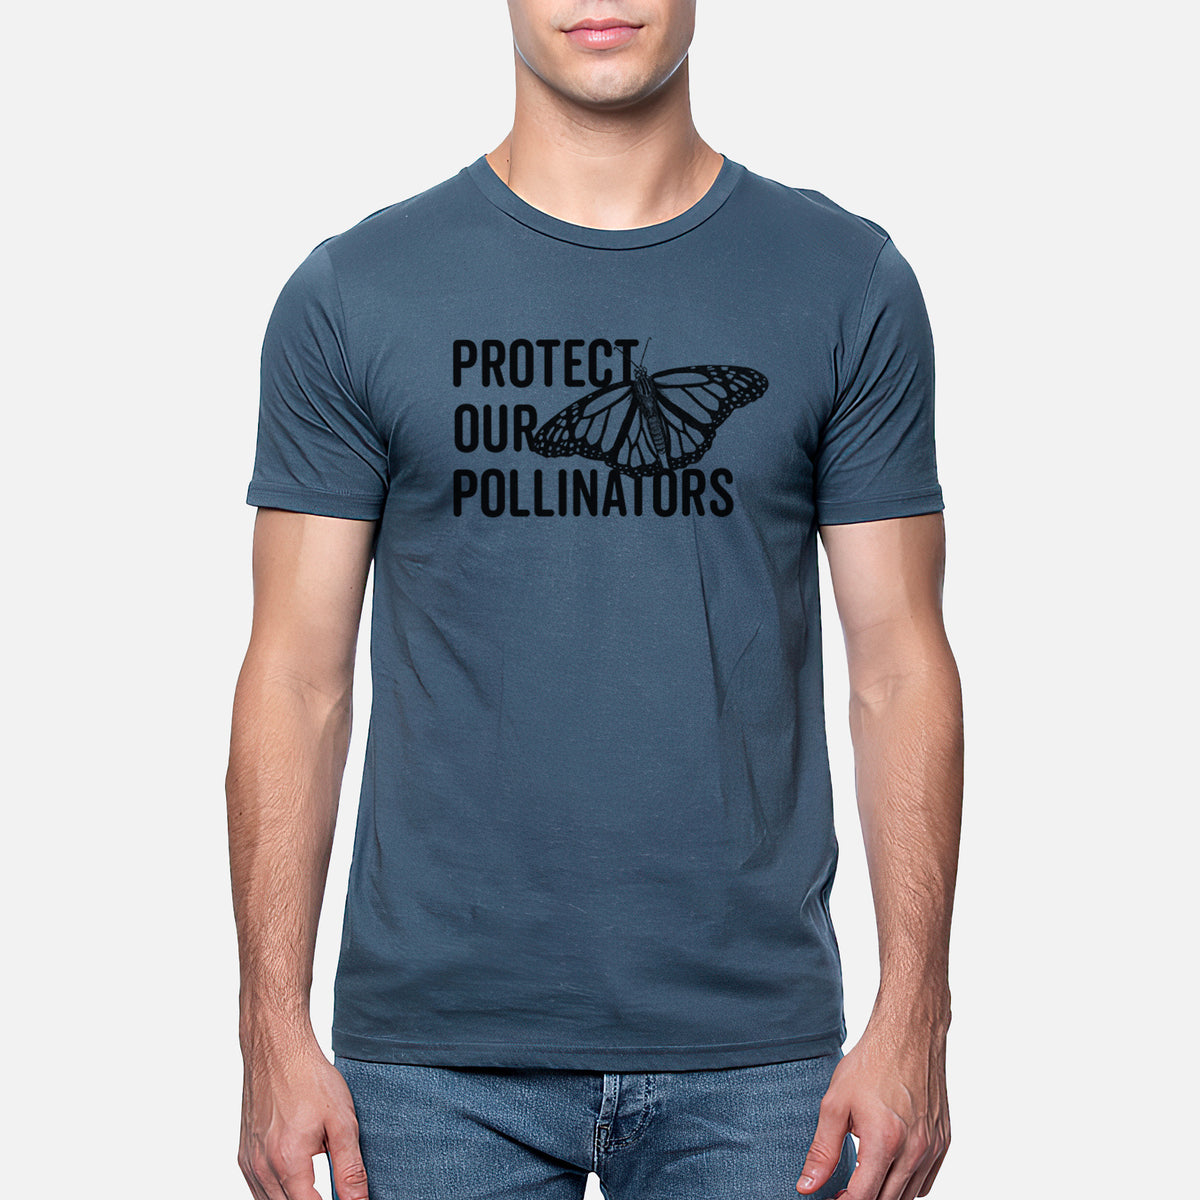 Protect our Pollinators - Unisex Crewneck - Made in USA - 100% Organic Cotton